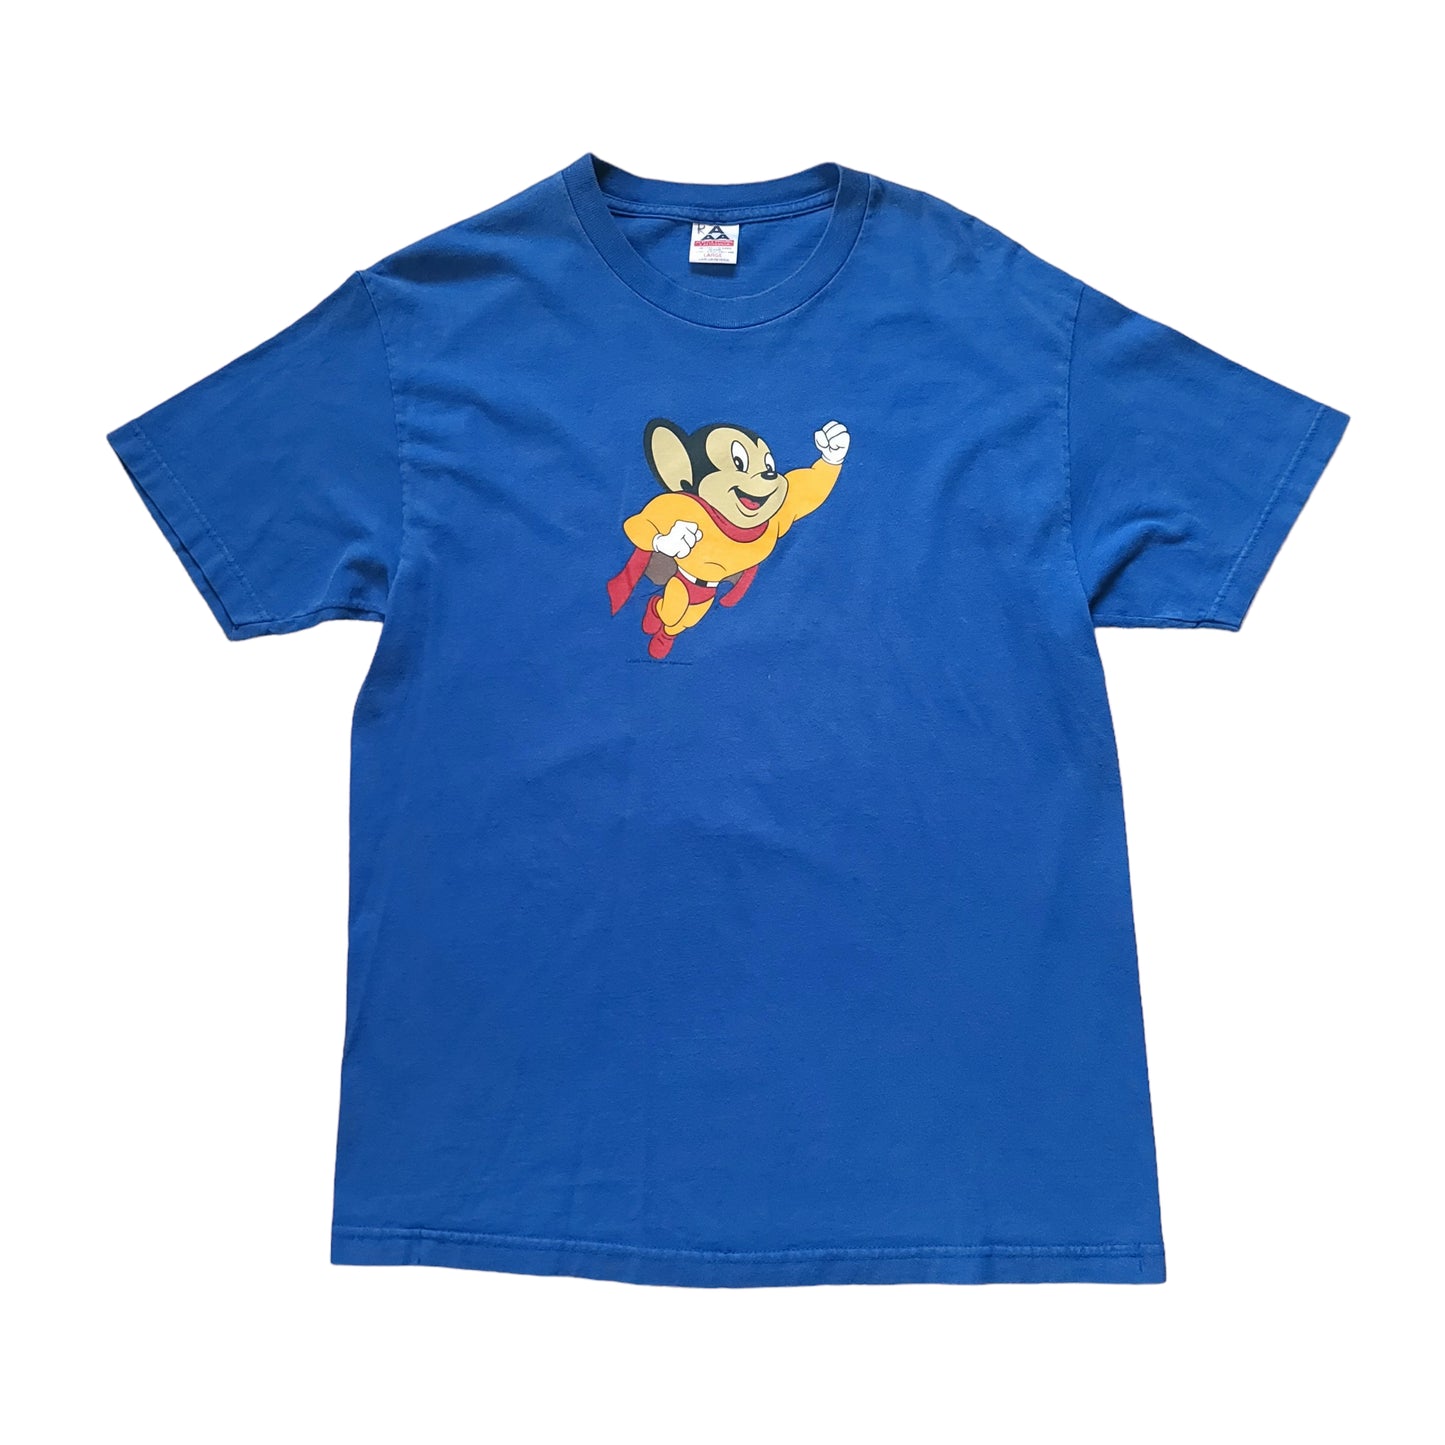 Mighty Mouse Blue Tee